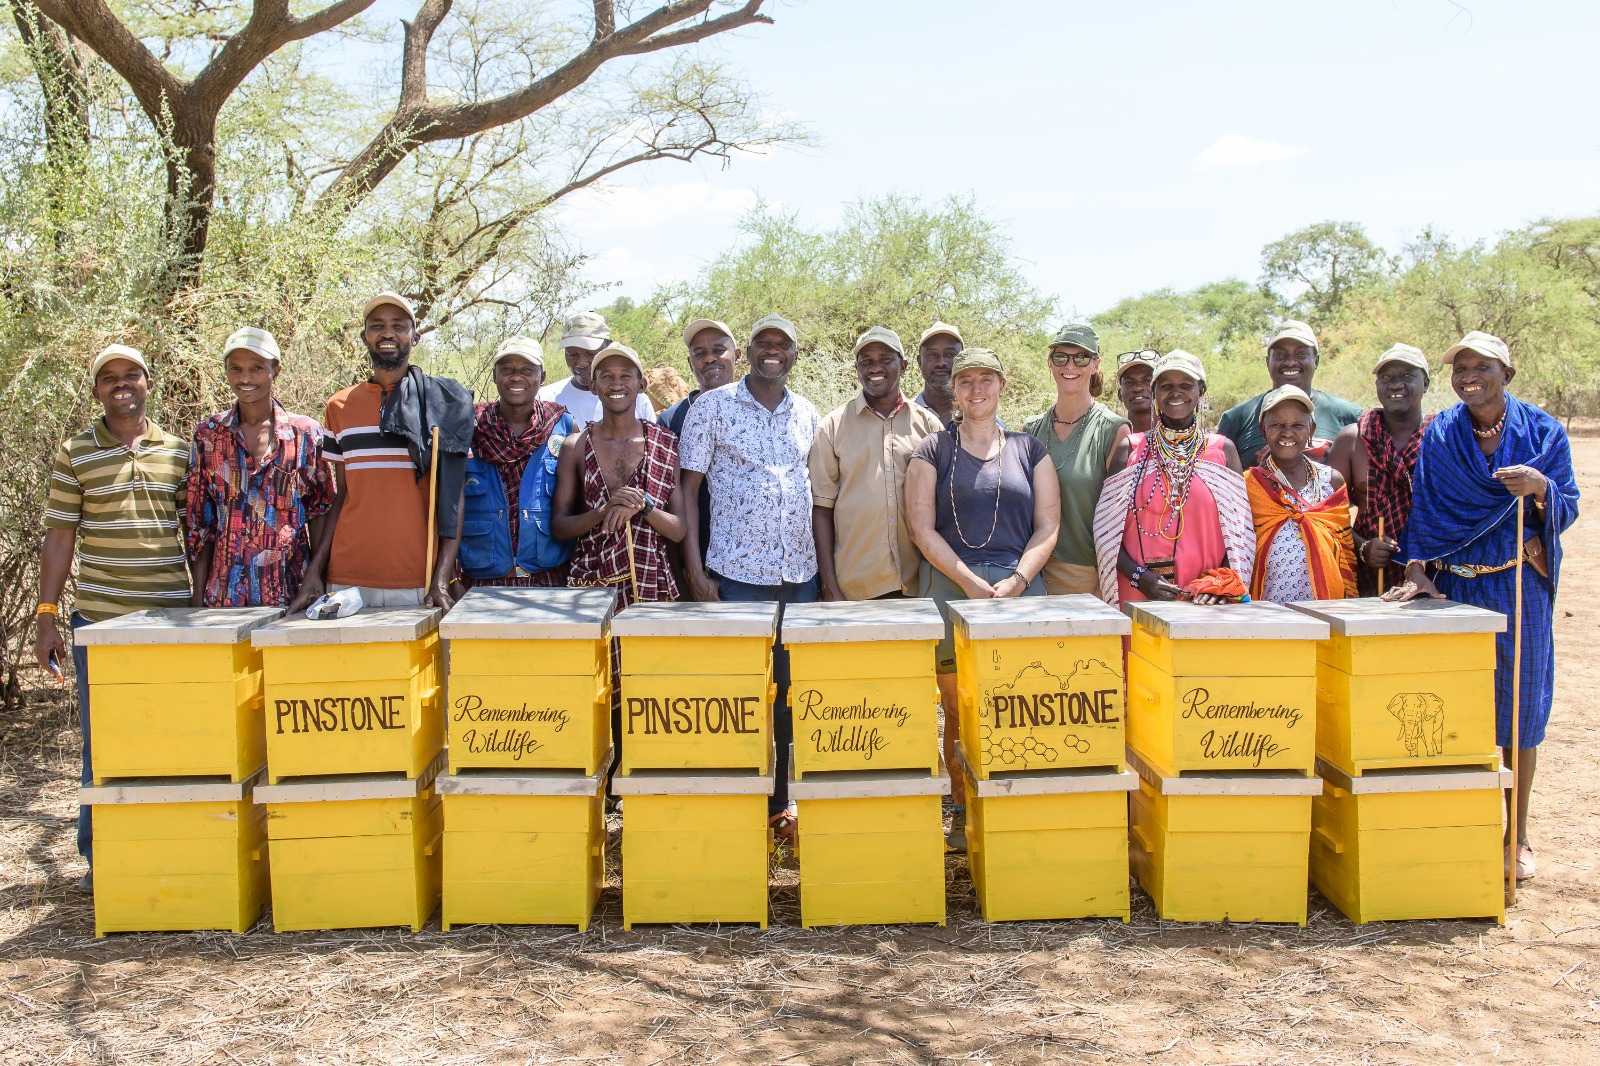 NEWS | Herefordshire-based company backs conservation project in Kenya 